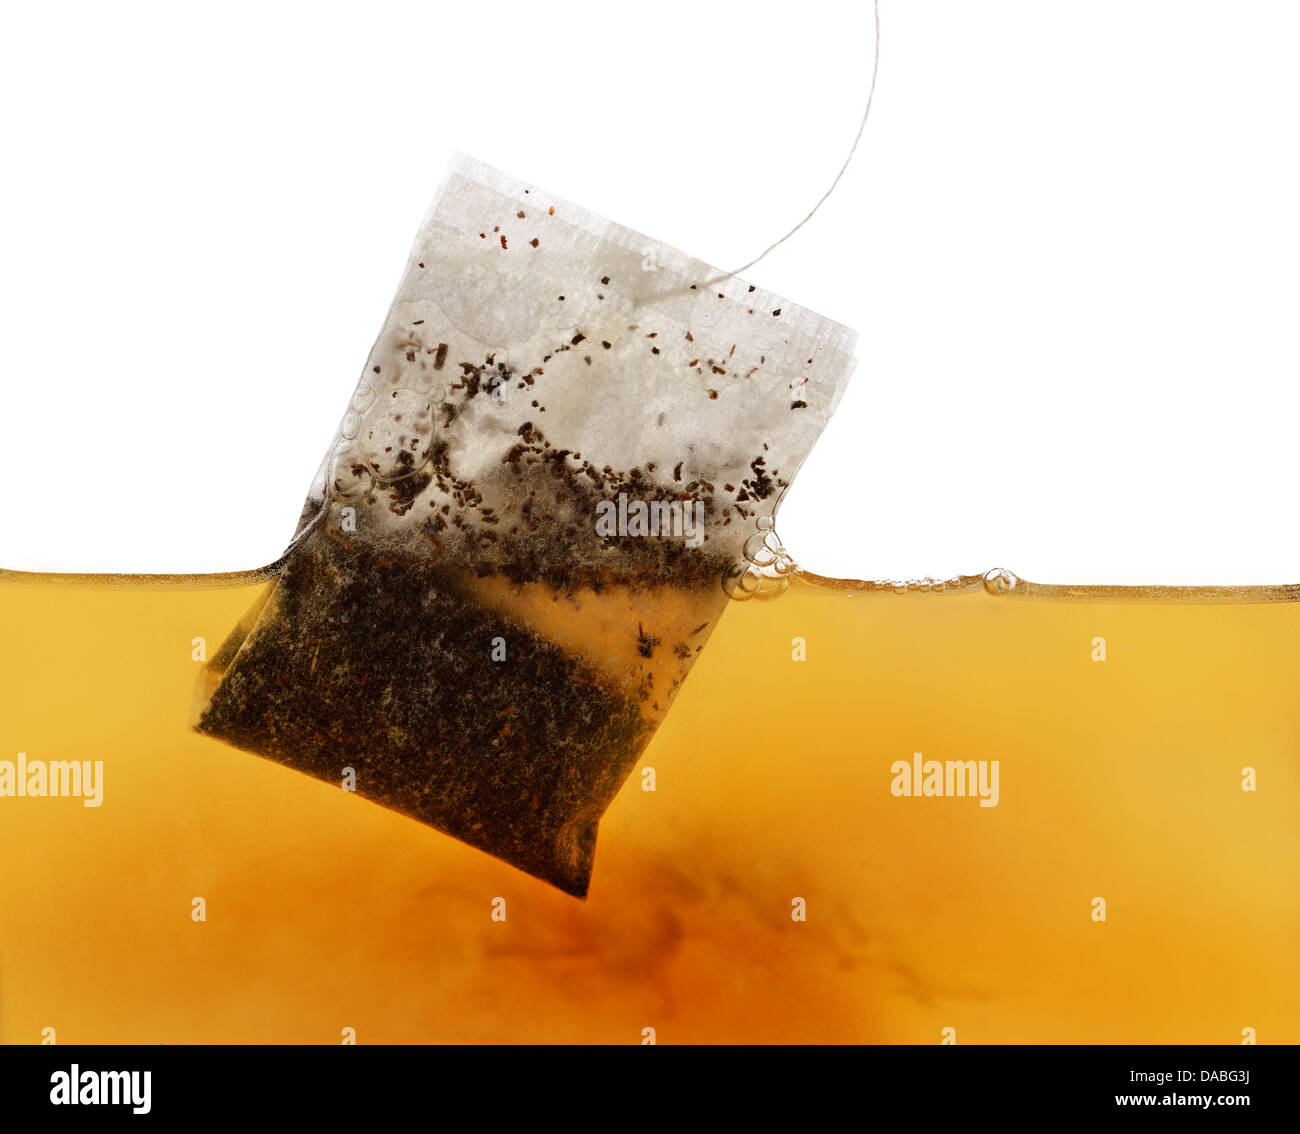 Tea Bag In Water On White Background Stock Photo